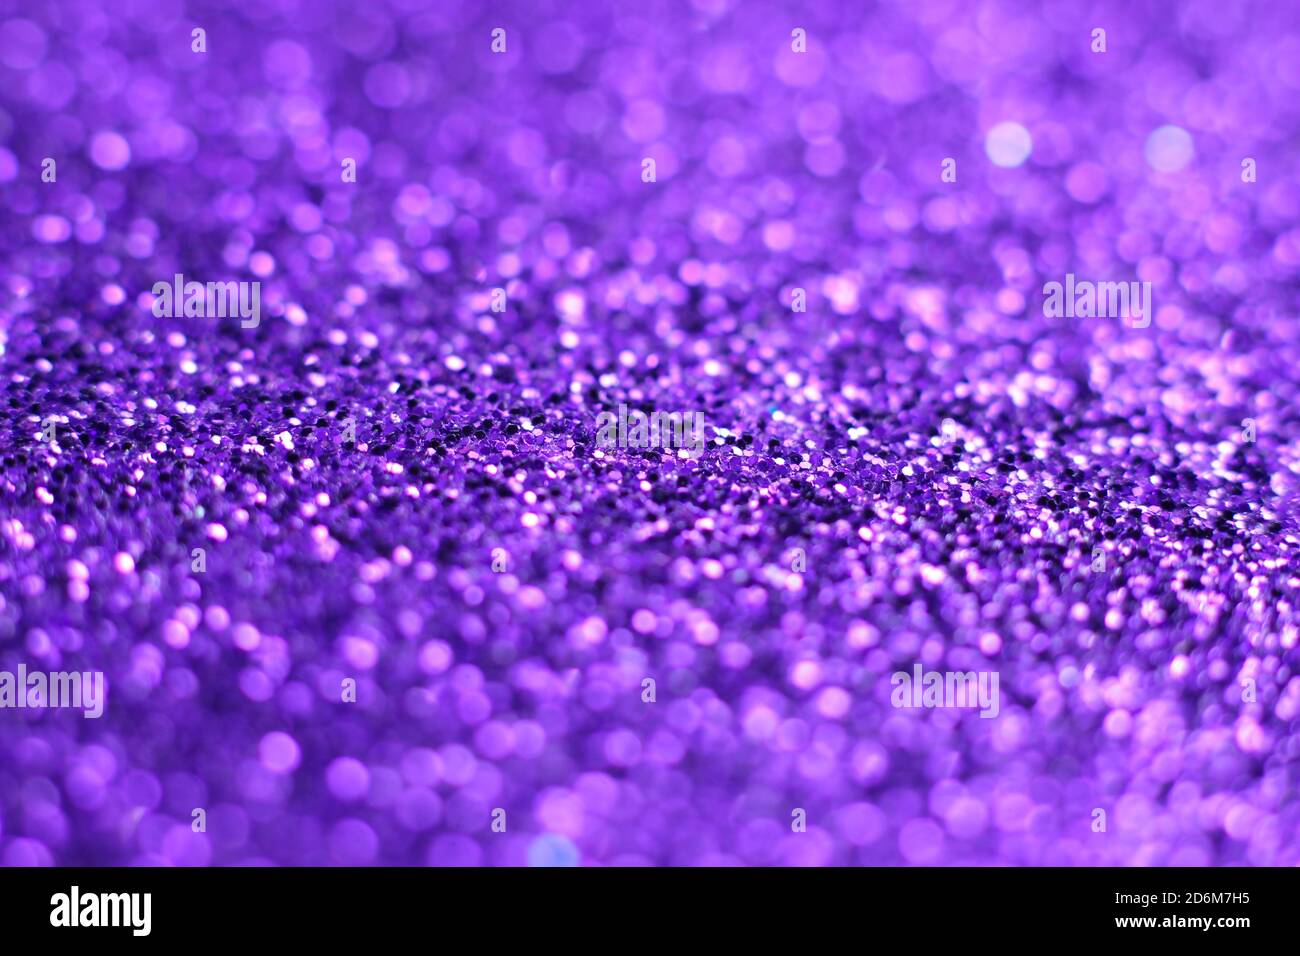 Violet And Purple Purple Glitter Pink Elegant Abstract Background Brilliant  Vector Stock Vector Adobe Stock 